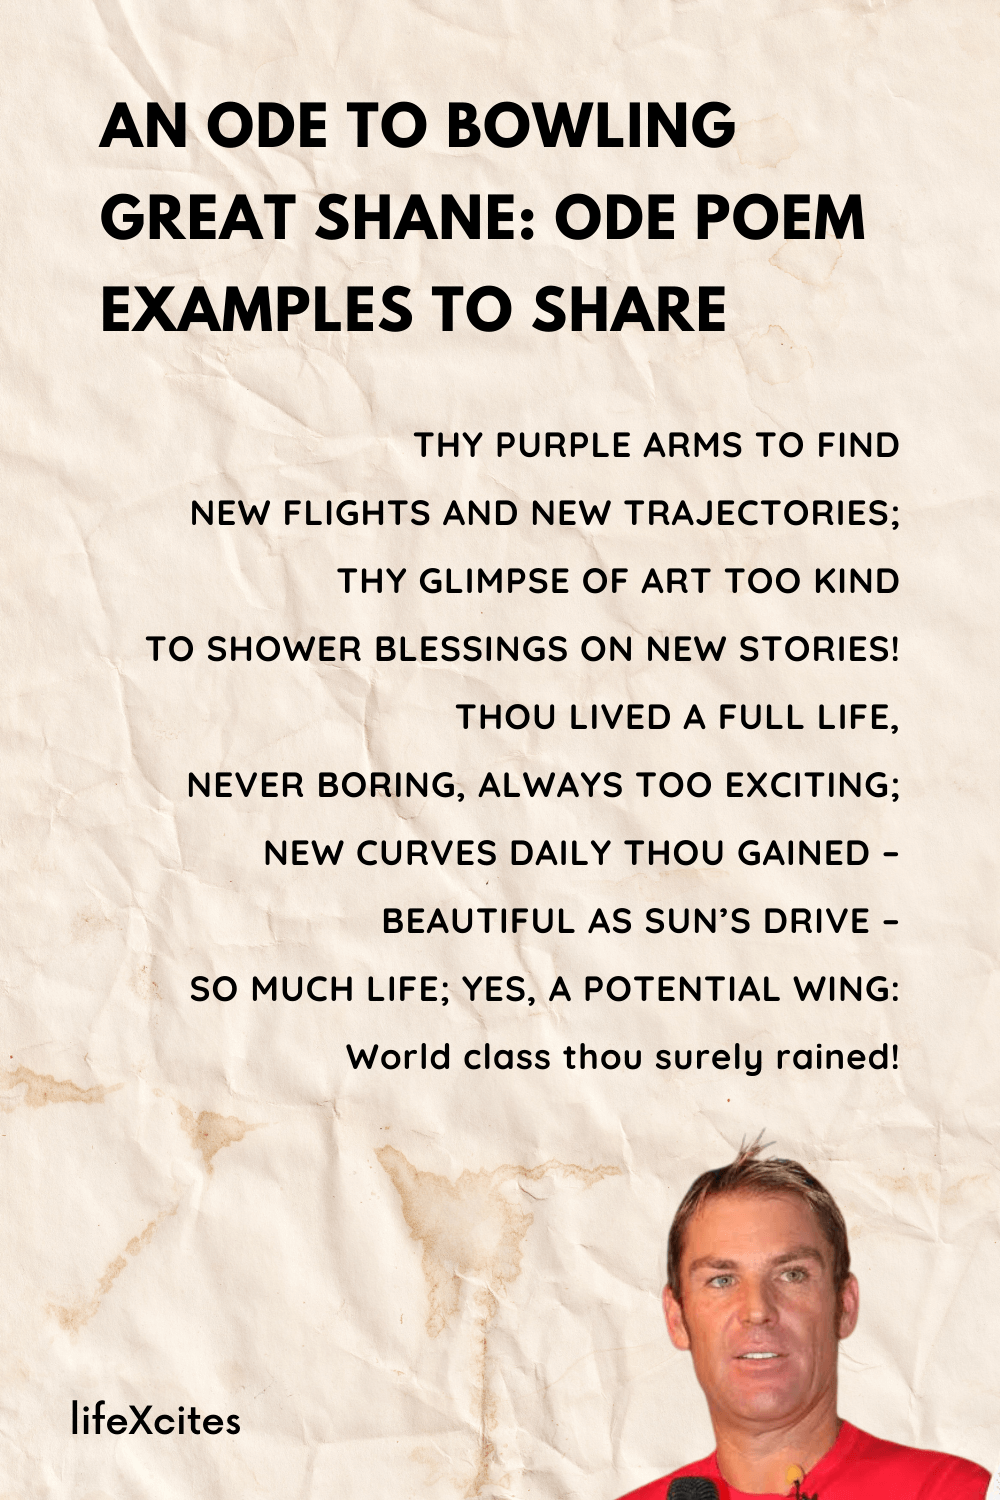 An Ode to Bowling Great Shane ode poem examples